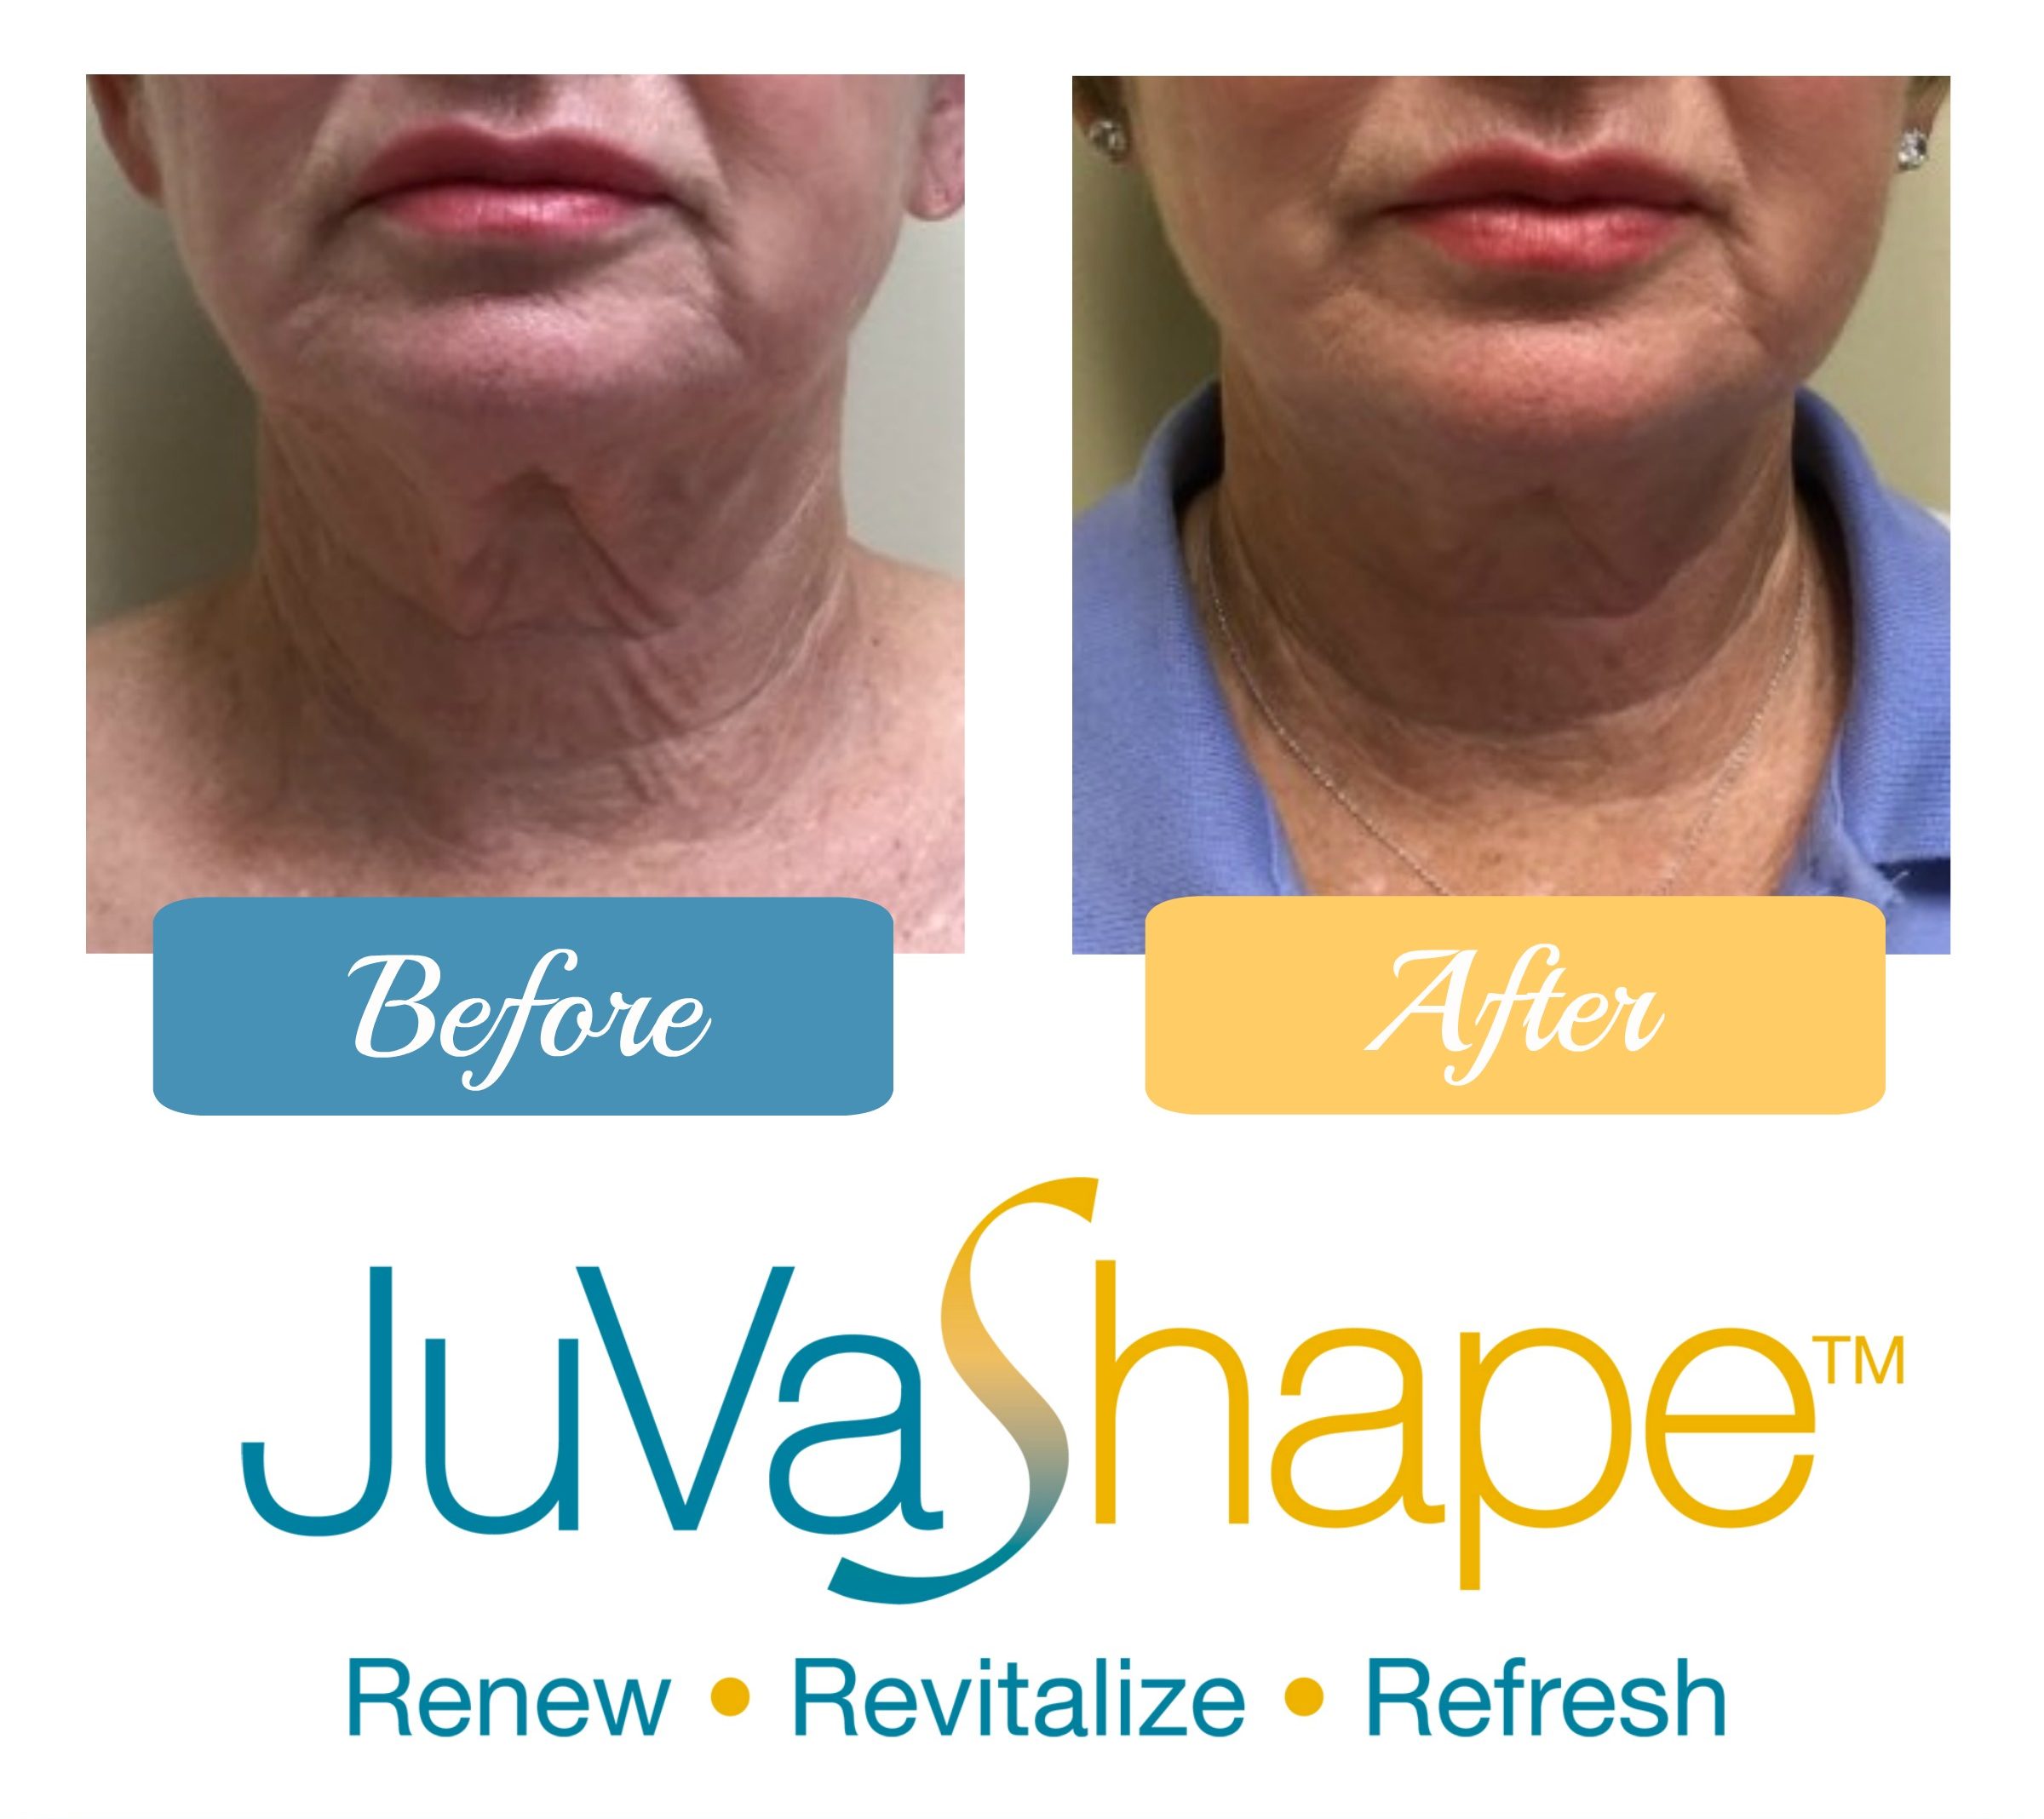 Wondering Why You Should Choose JuVaShape over Coolsculpting?